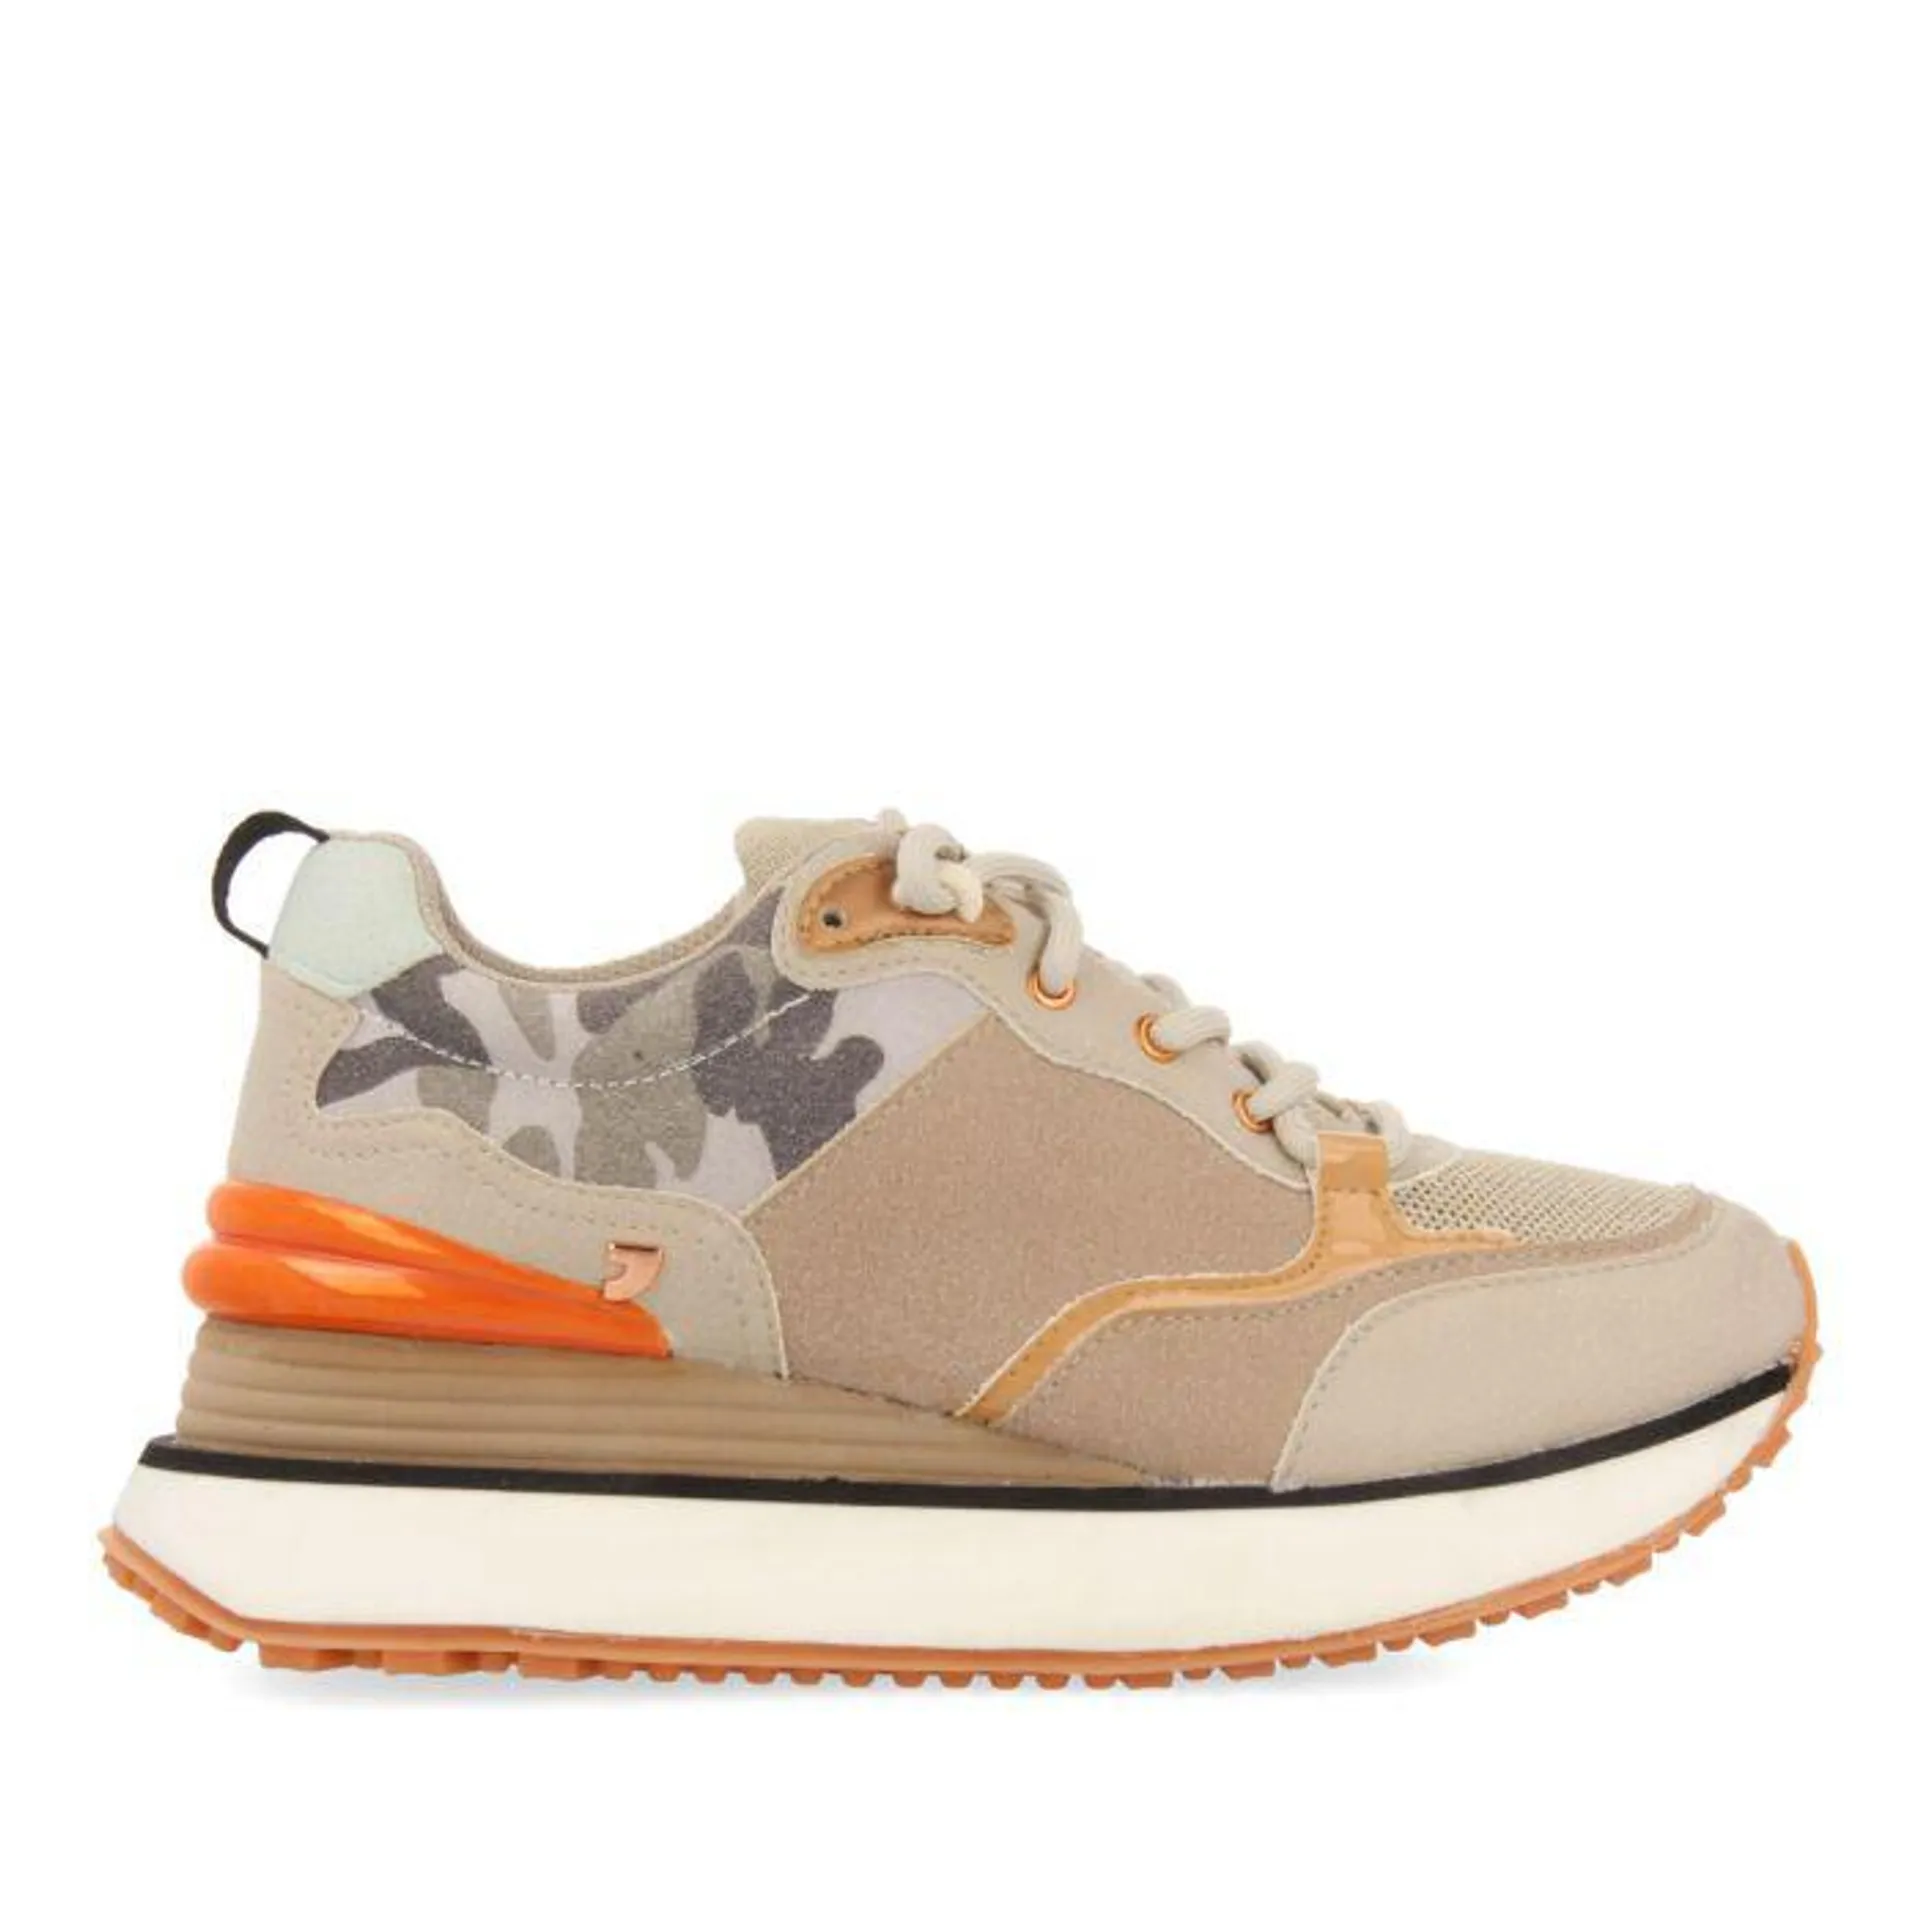 Medingen women's camouflage sneakers with outer wedges, featuring orange, gold, beige and mint green